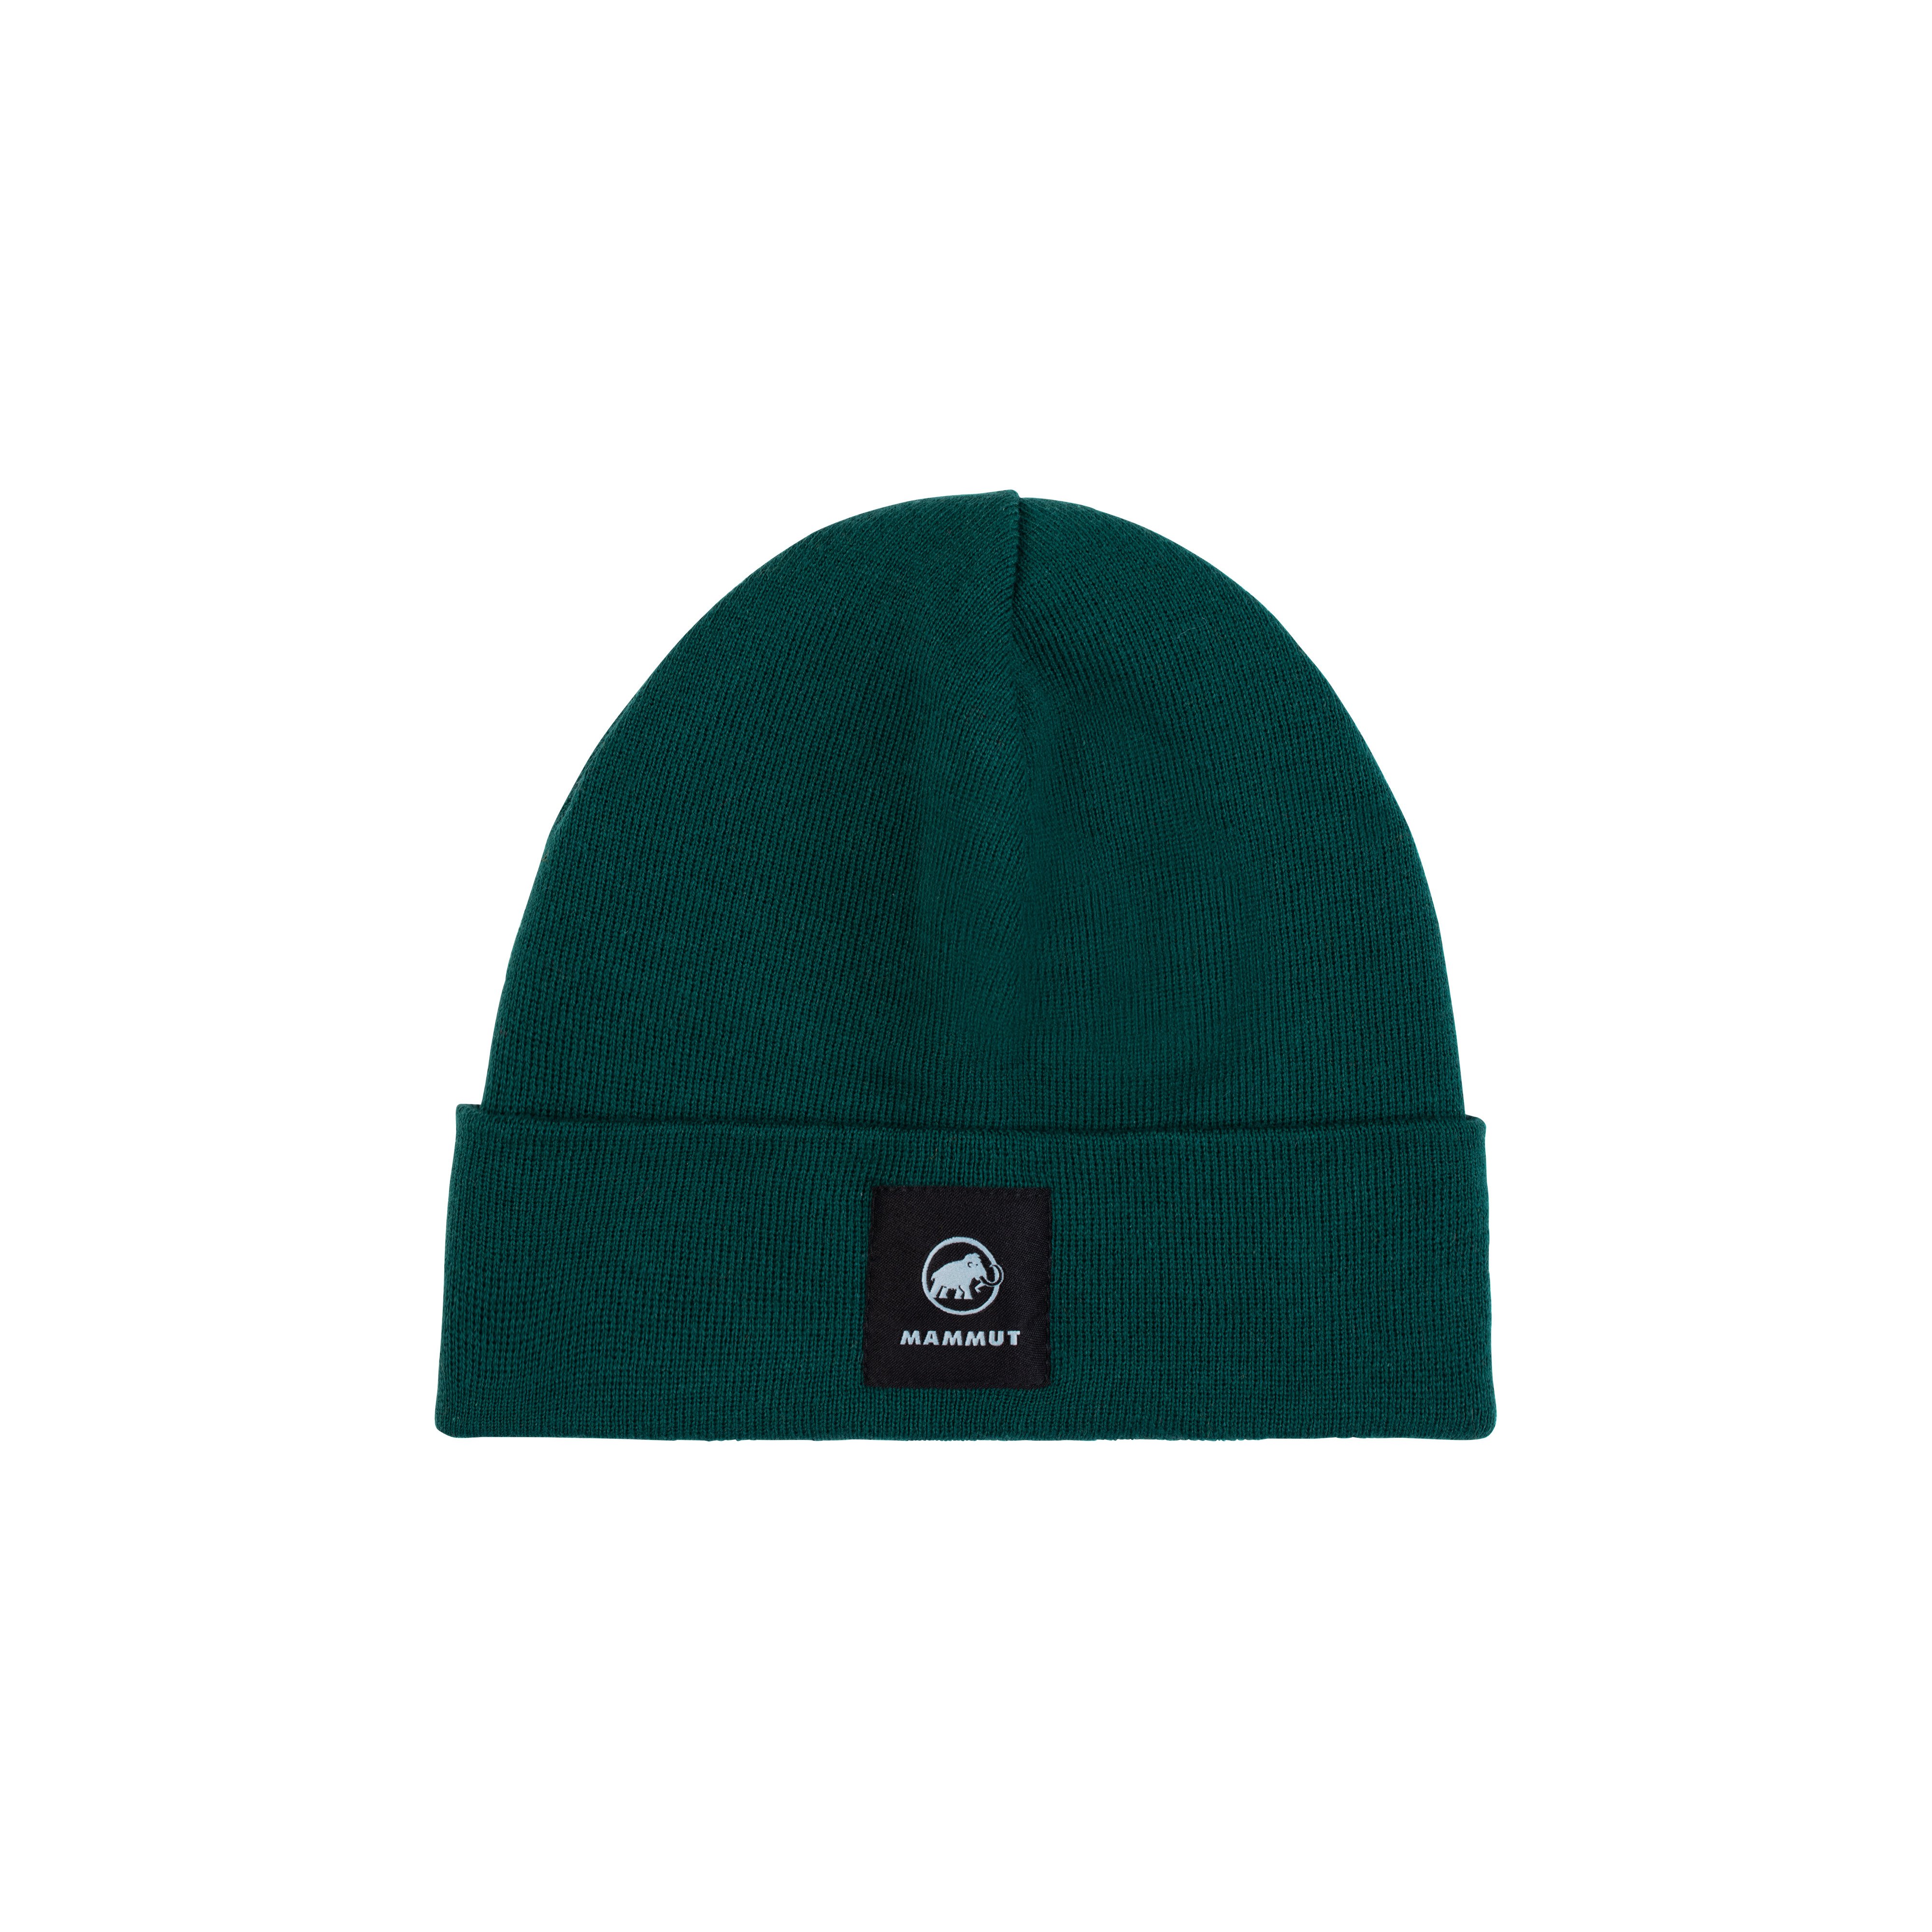 Fedoz Beanie - dark teal, one size product image